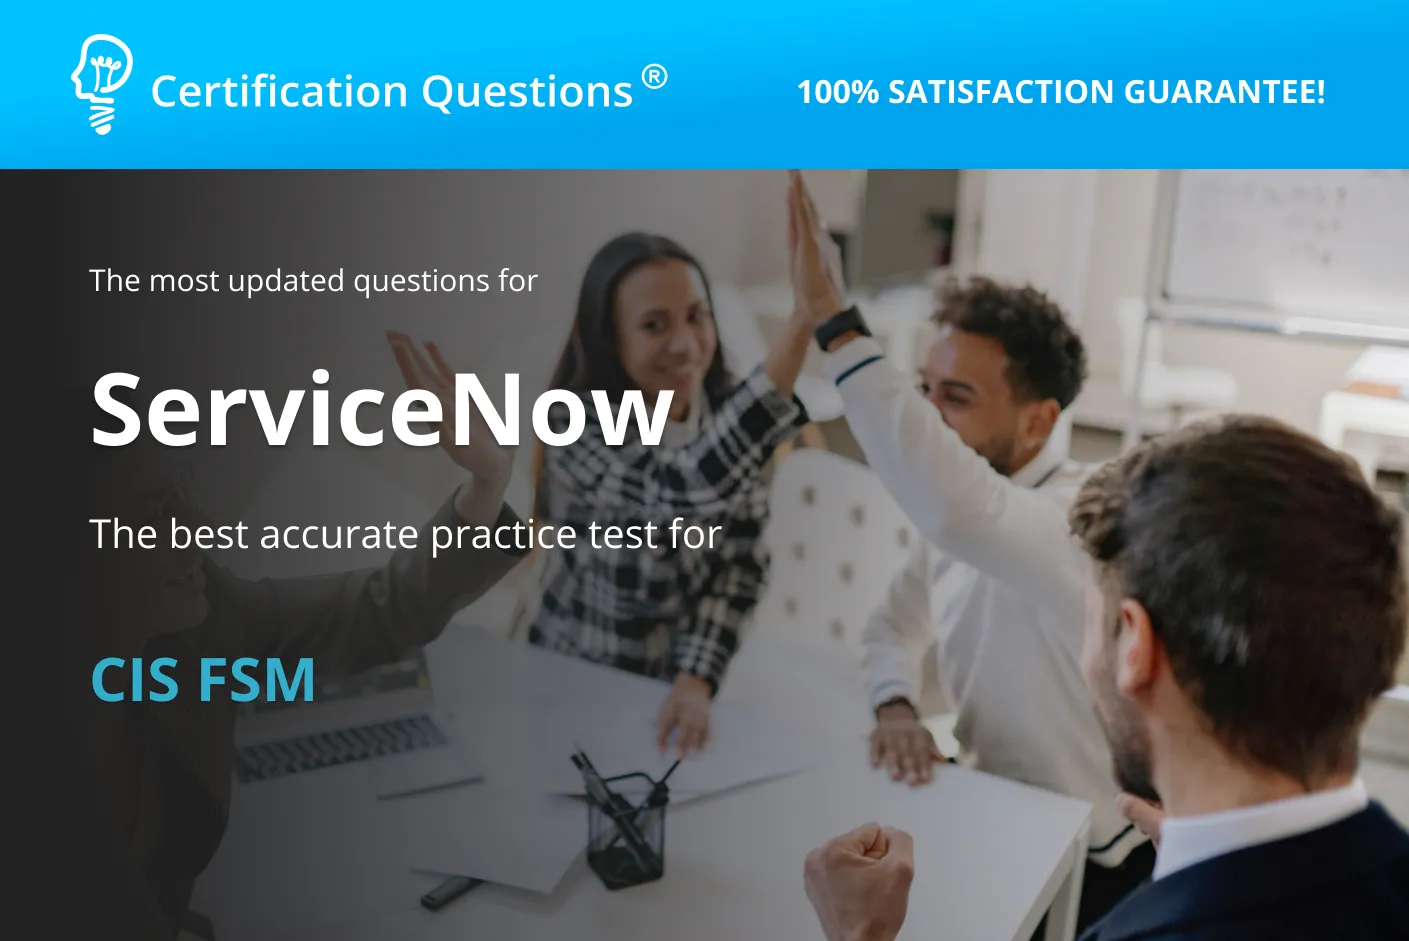 In this ultimate study guide, we will learn about the Field Service Management ServiceNow exam in detail.